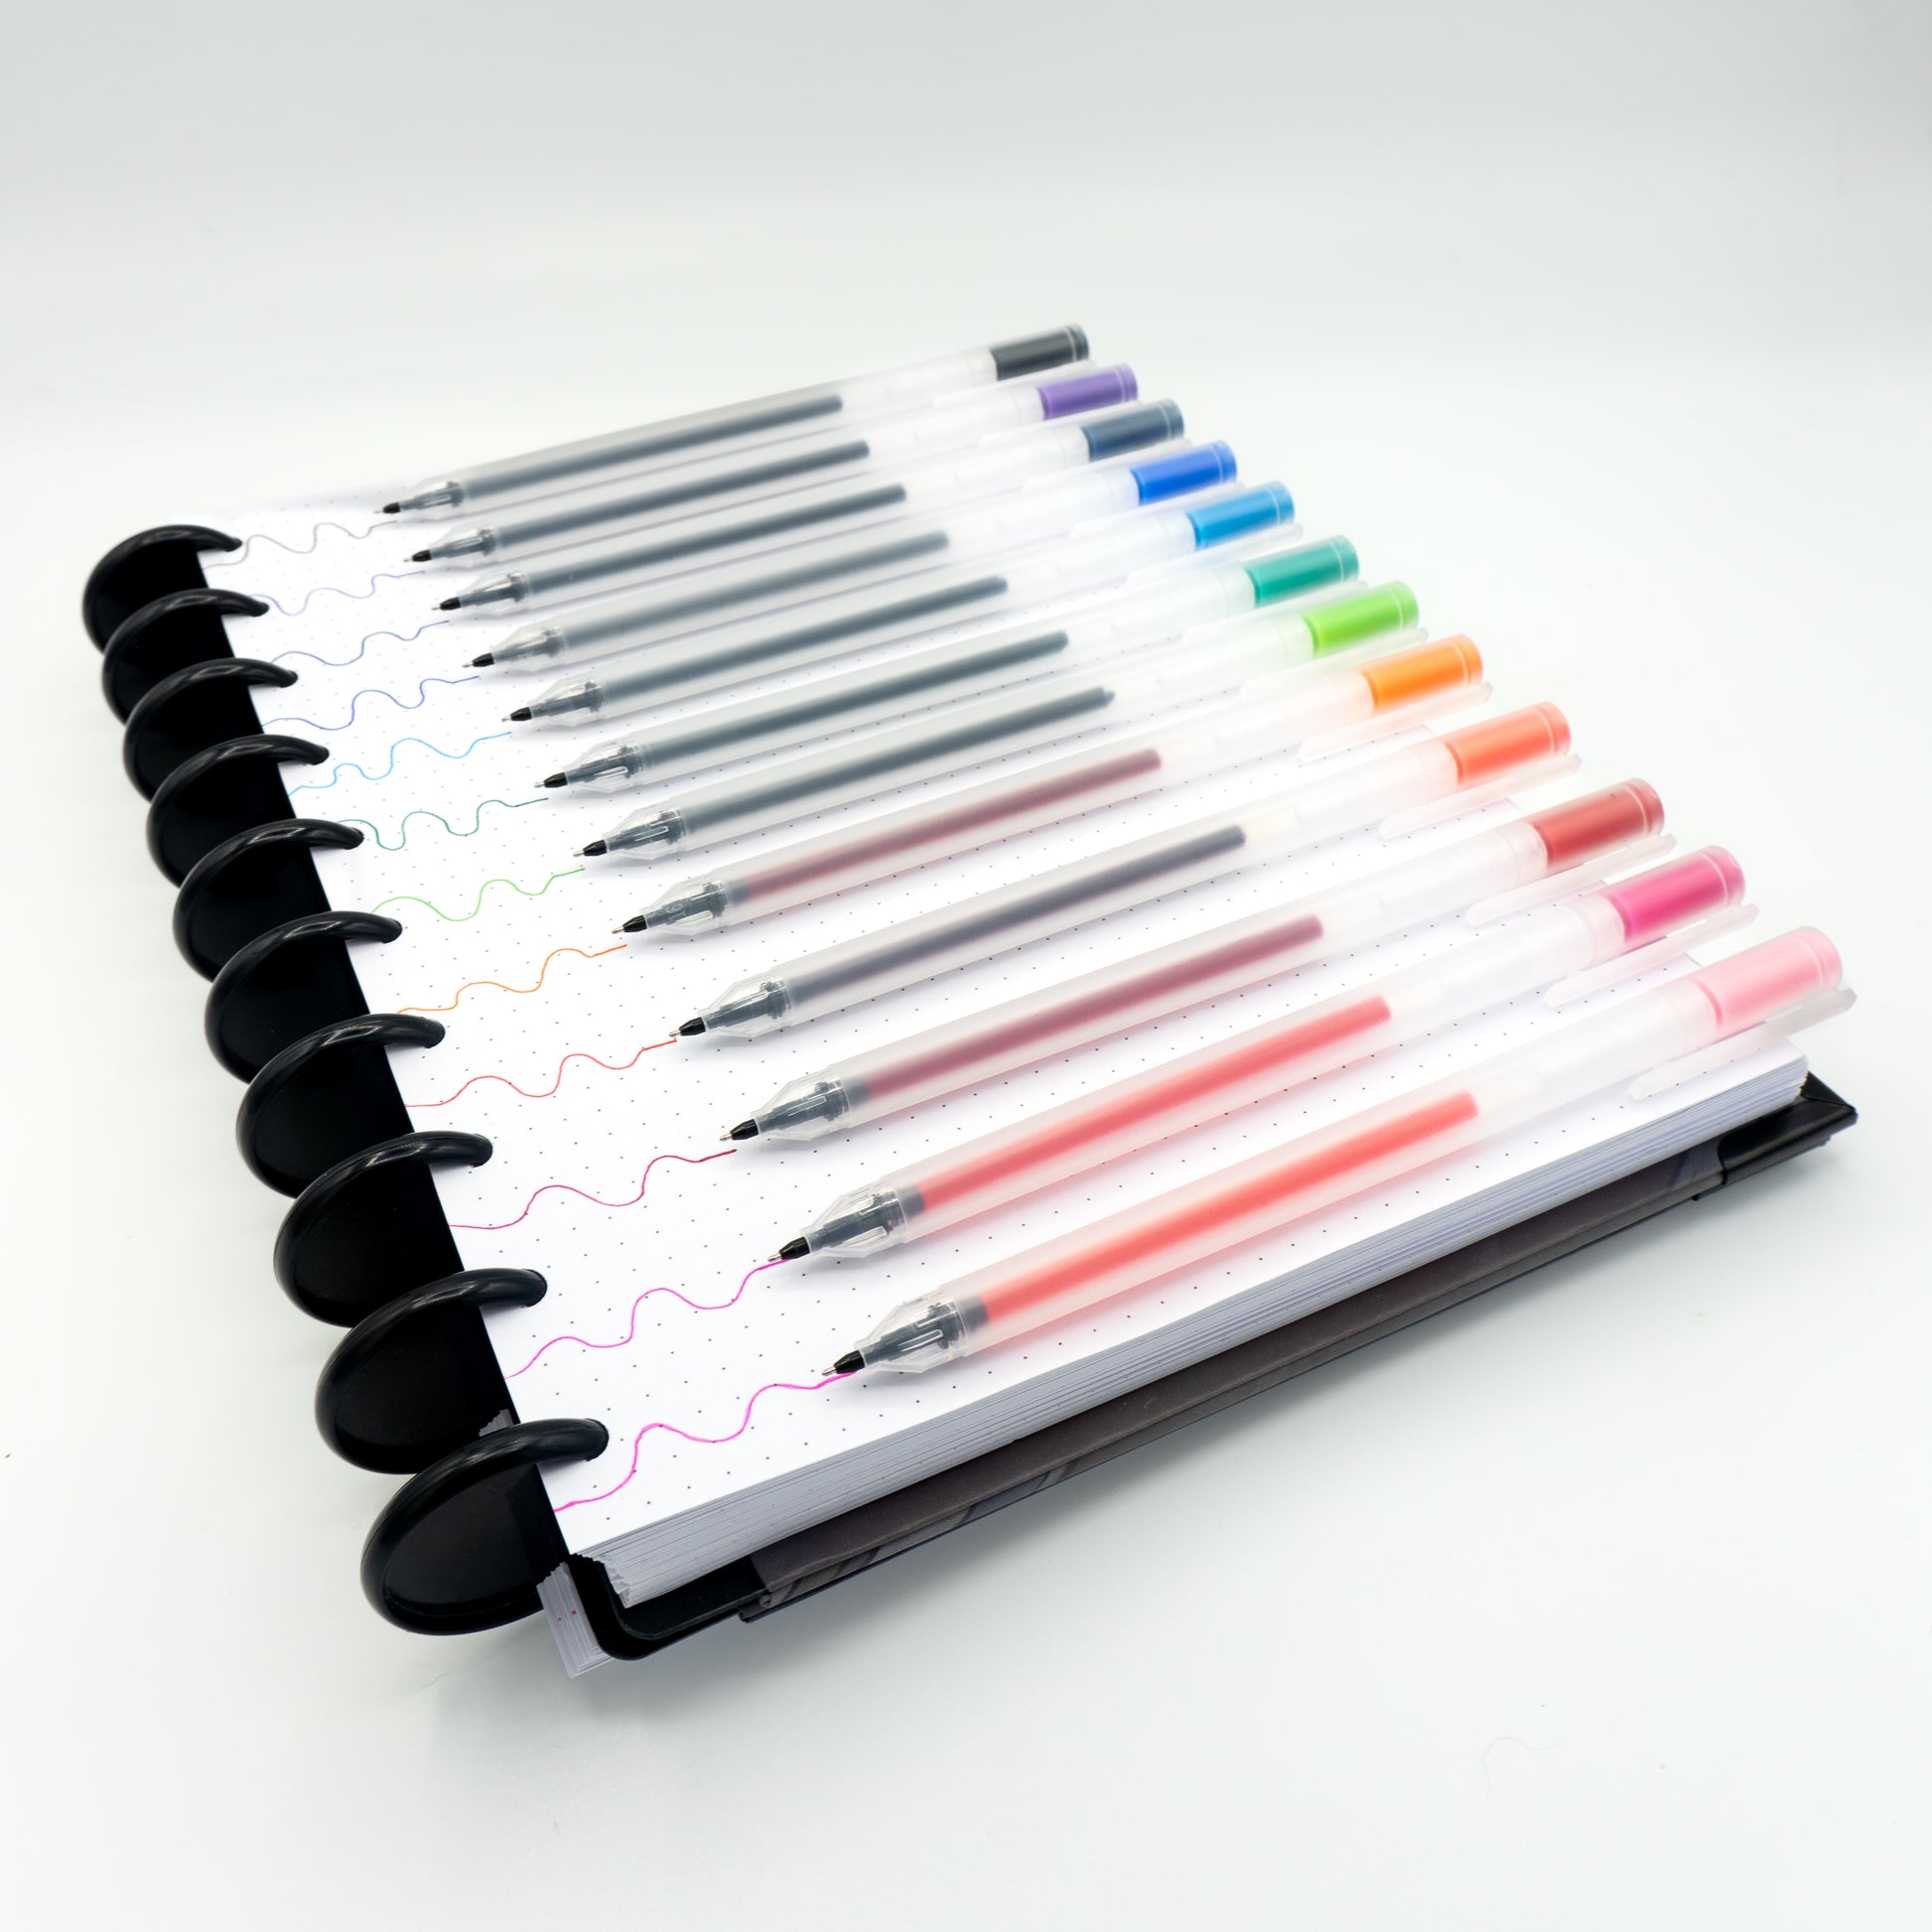 Twelve pens and their colors on paper